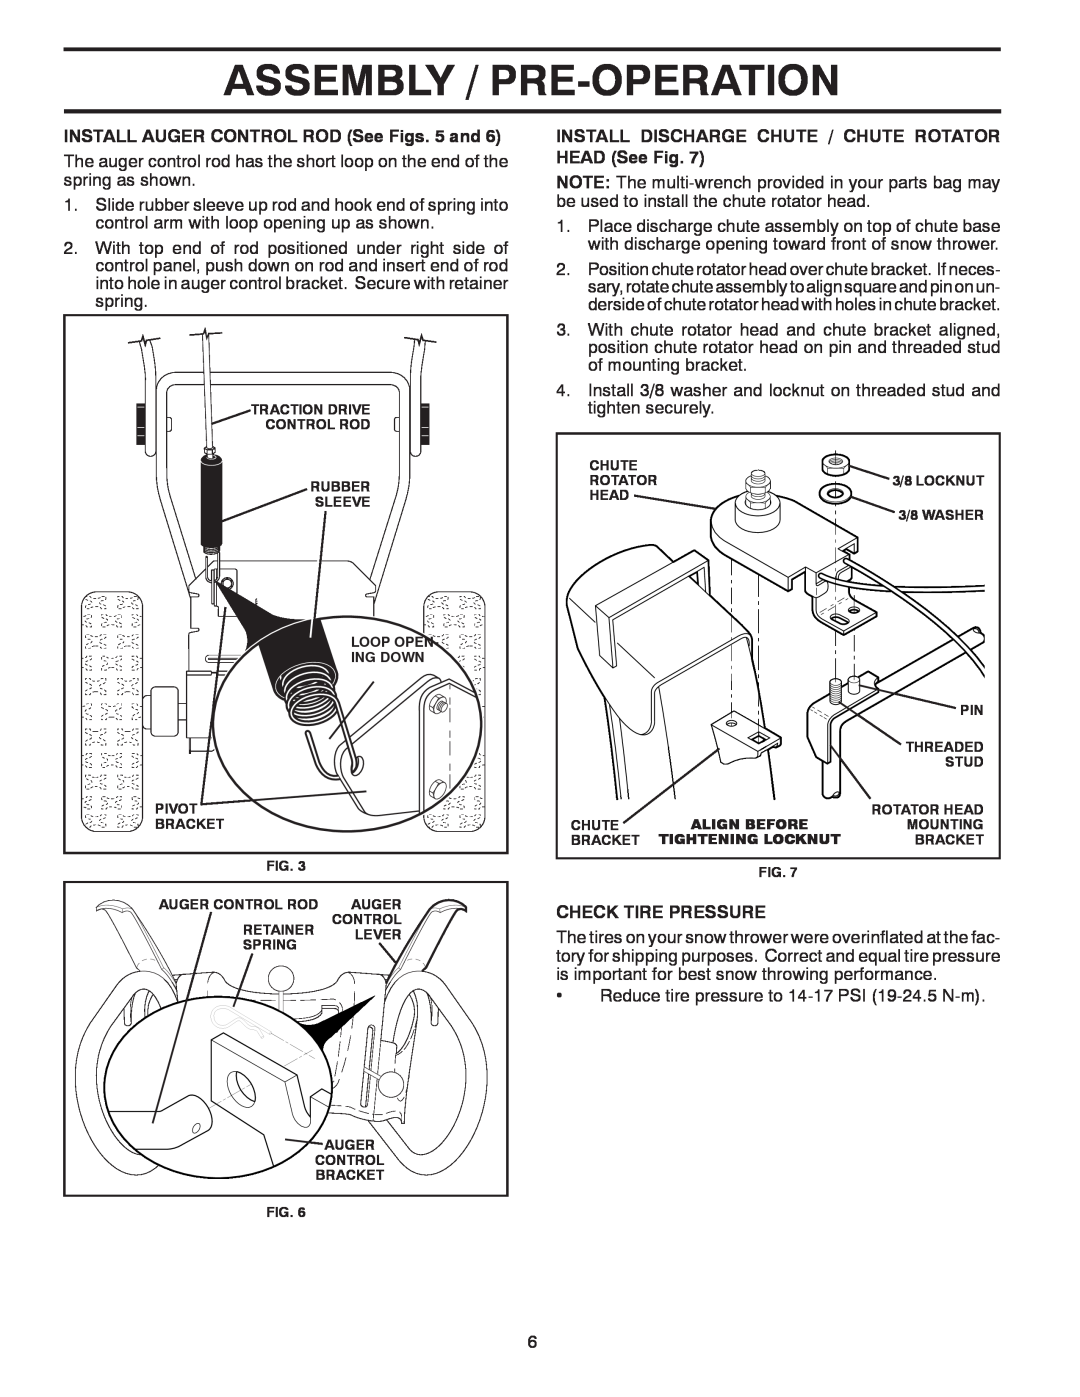 Poulan 424714, 96198002501 Assembly / Pre-Operation, INSTALL AUGER CONTROL ROD See Figs. 5 and, Check Tire Pressure 